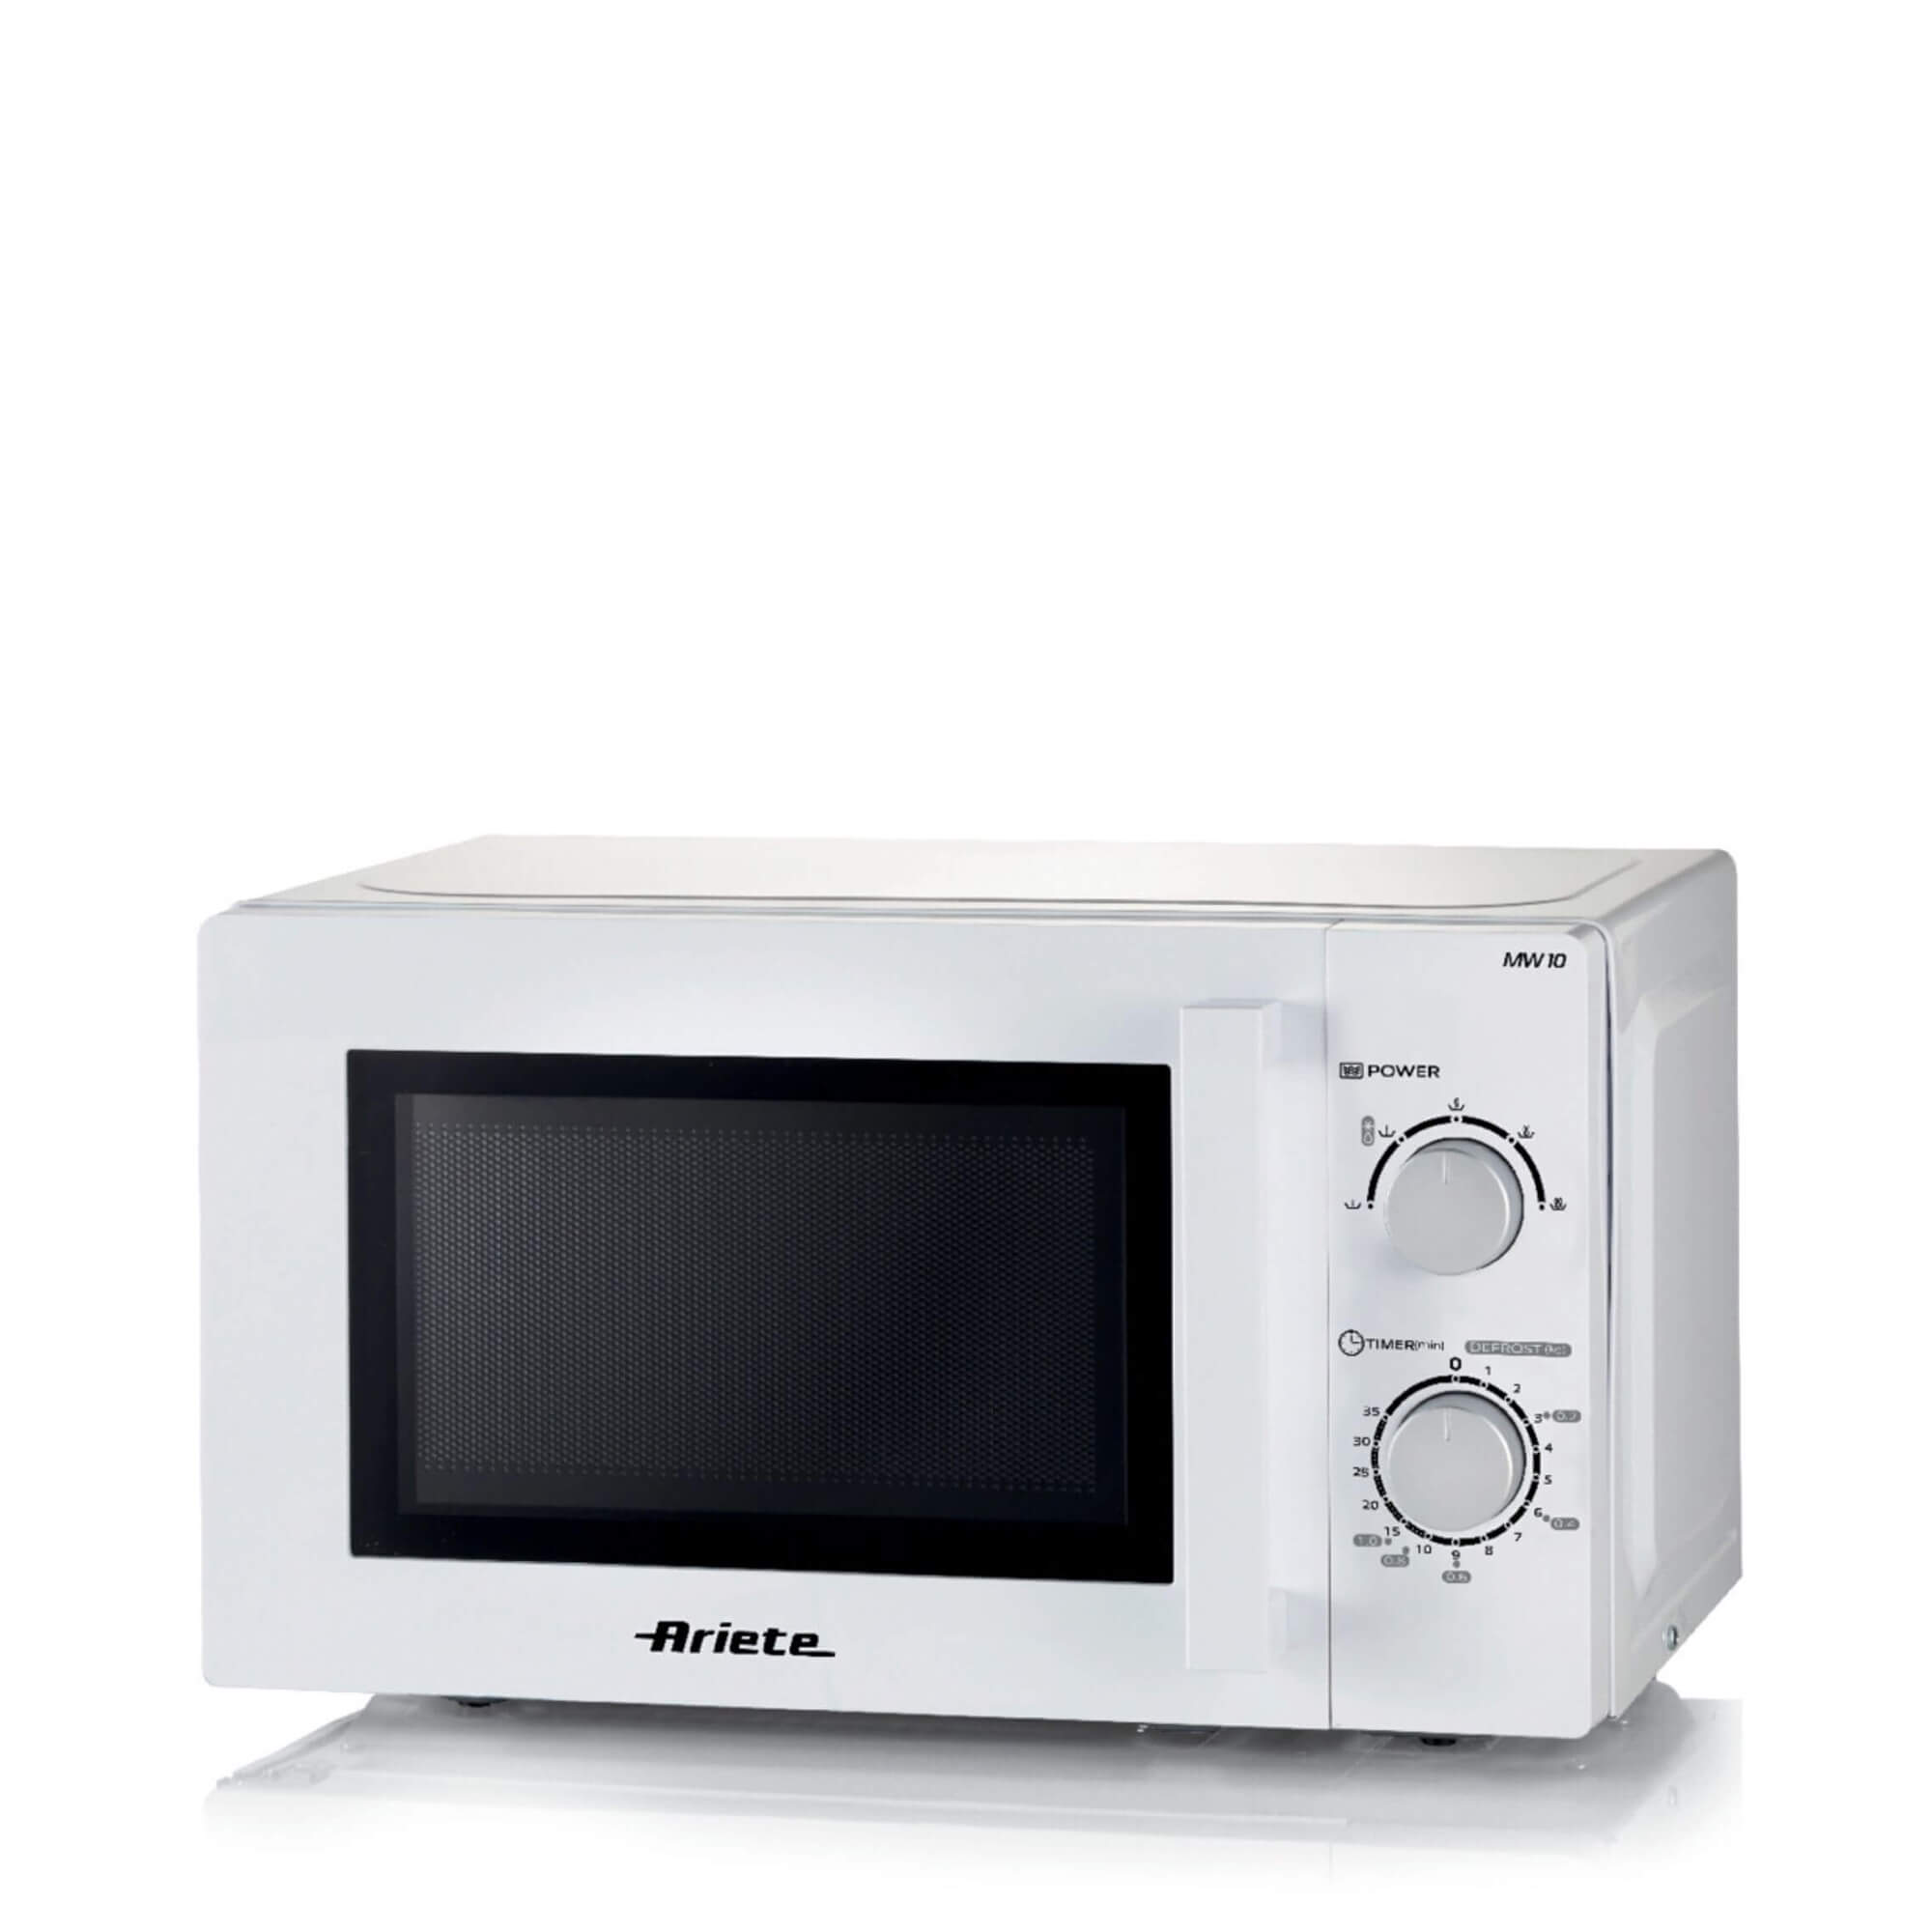 Microwave oven for defrosting and reheating, Microwave oven 951